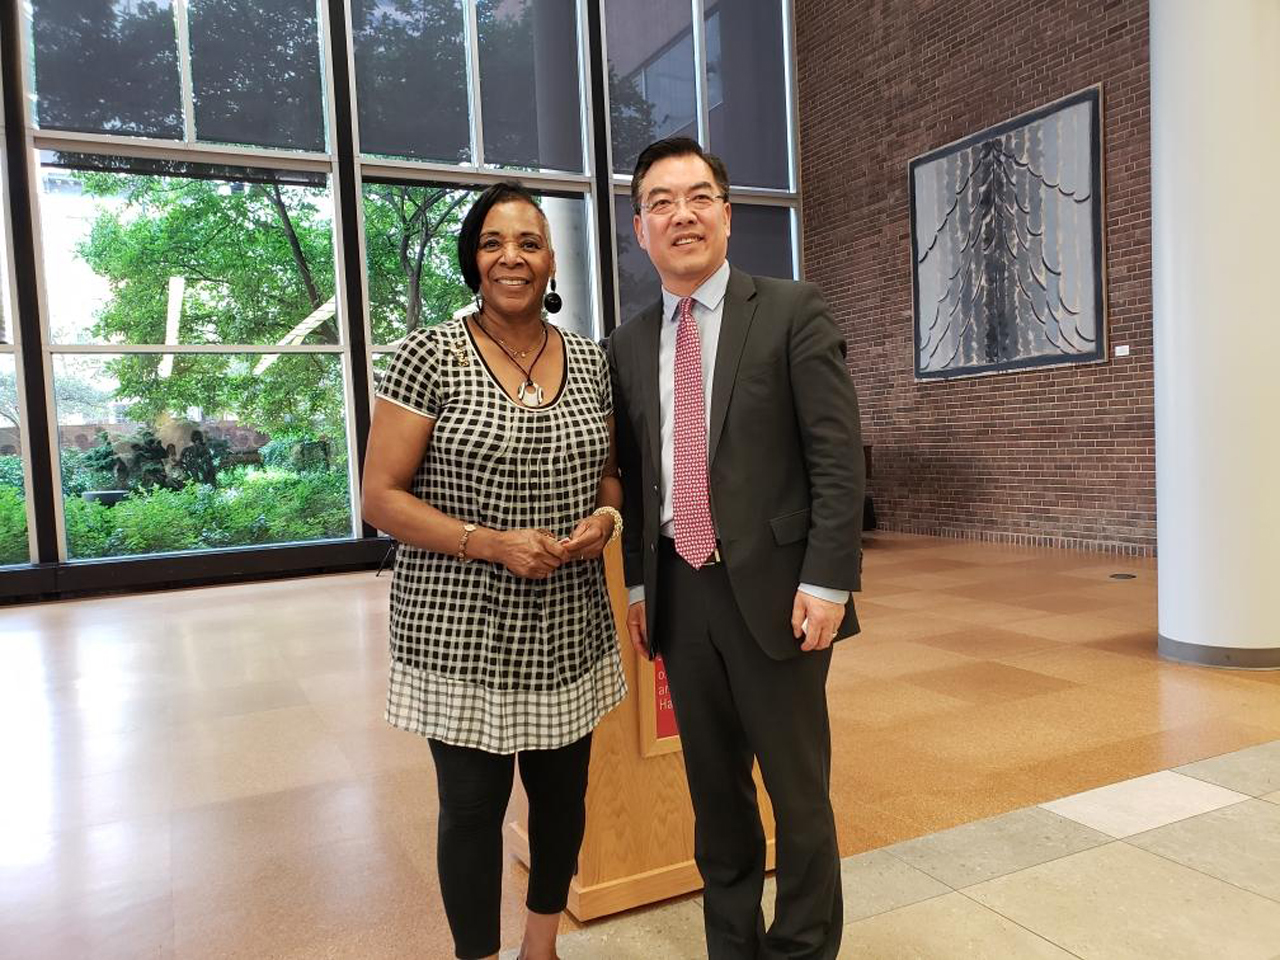 Rep. Ingram with Chinese Consul General Ambassador Ping Huang at the Chinese Railroad Workers Photography Exhibit in Cincinnati